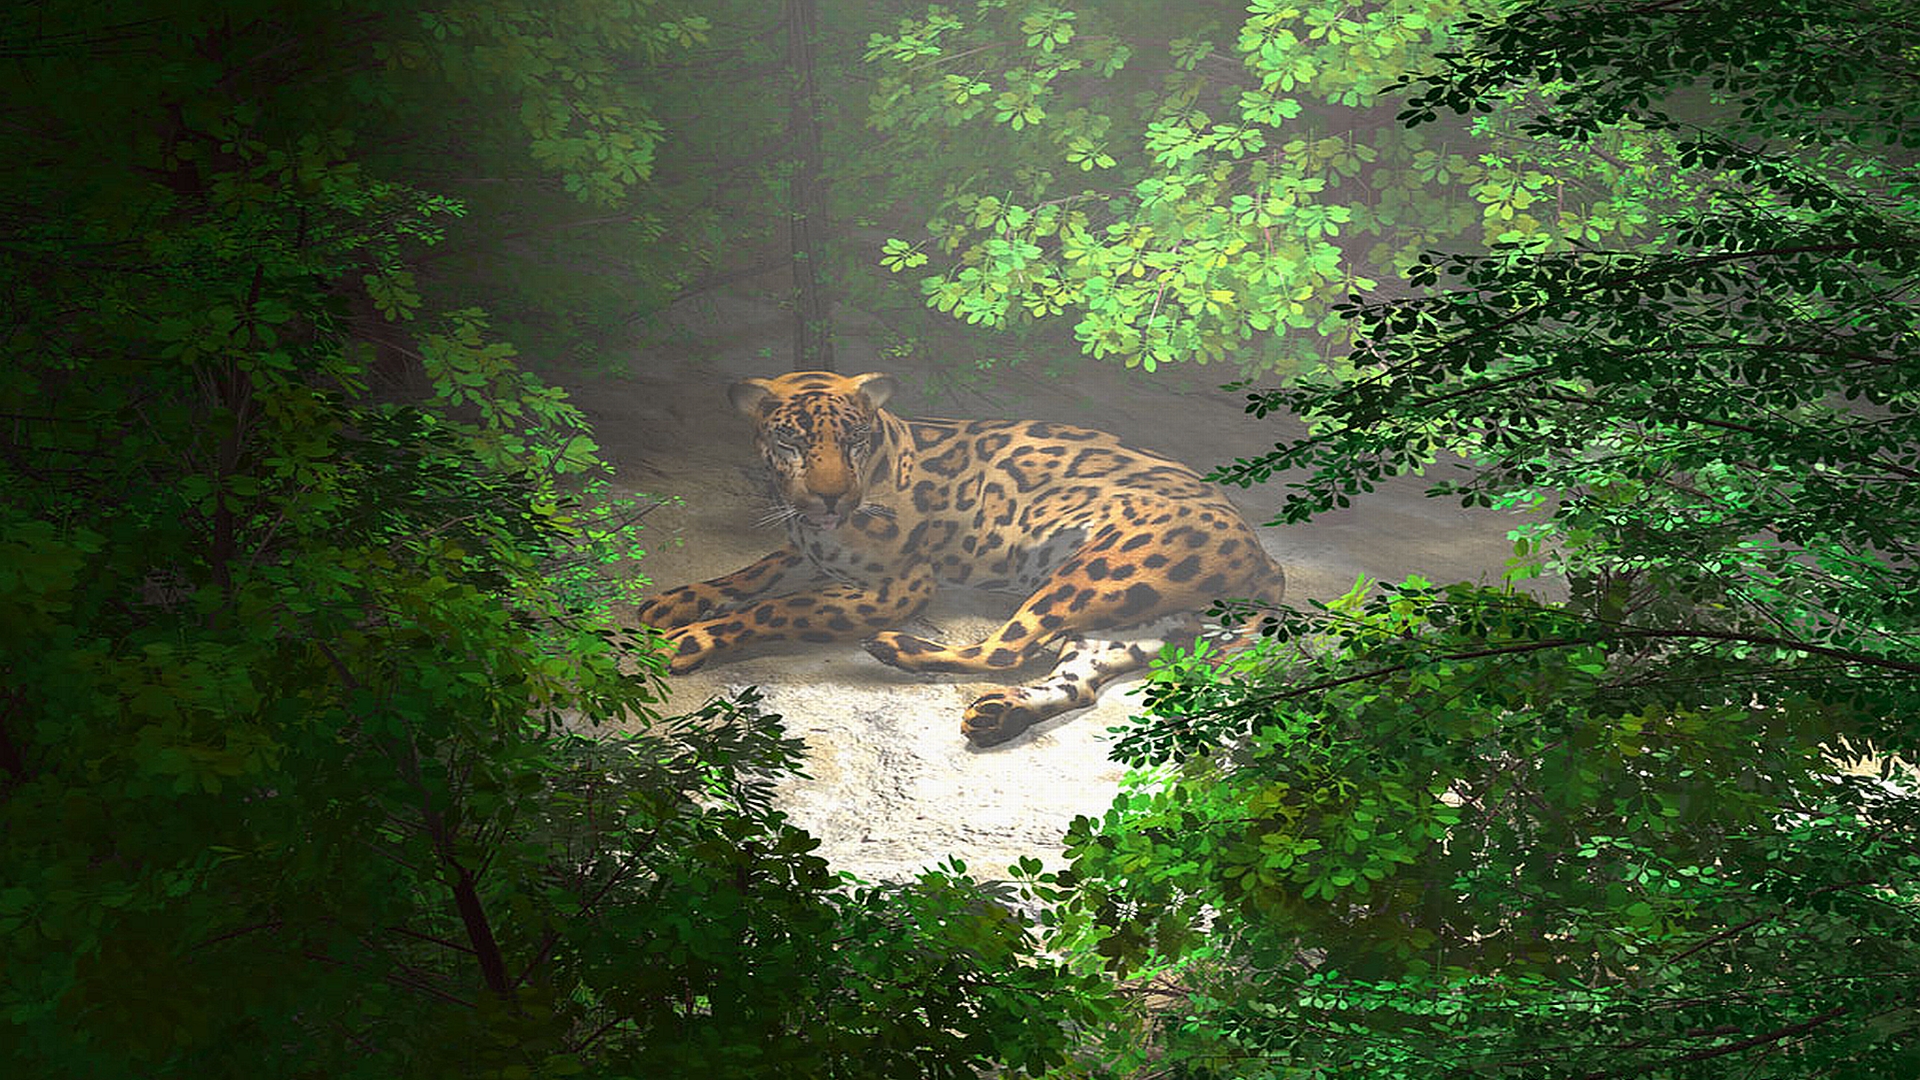 A tranquil animal scene, rendered with stunning CGI.